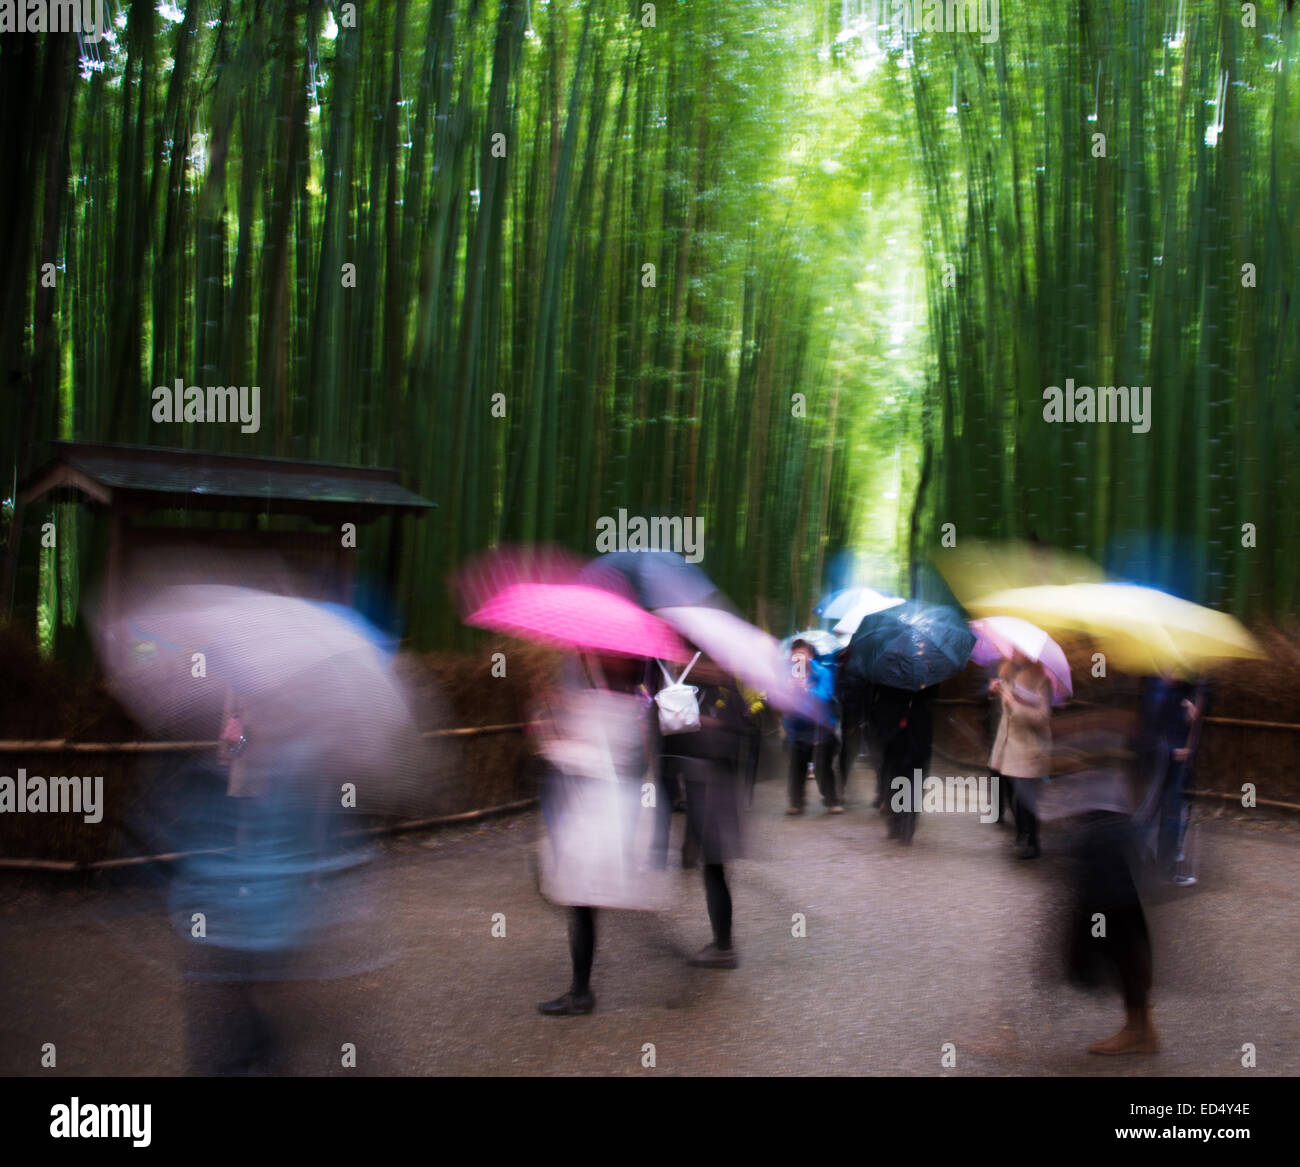 Artistic image of a wet day in the bamboo groves of Arashiyama, Kyoto, Japan. Stock Photo